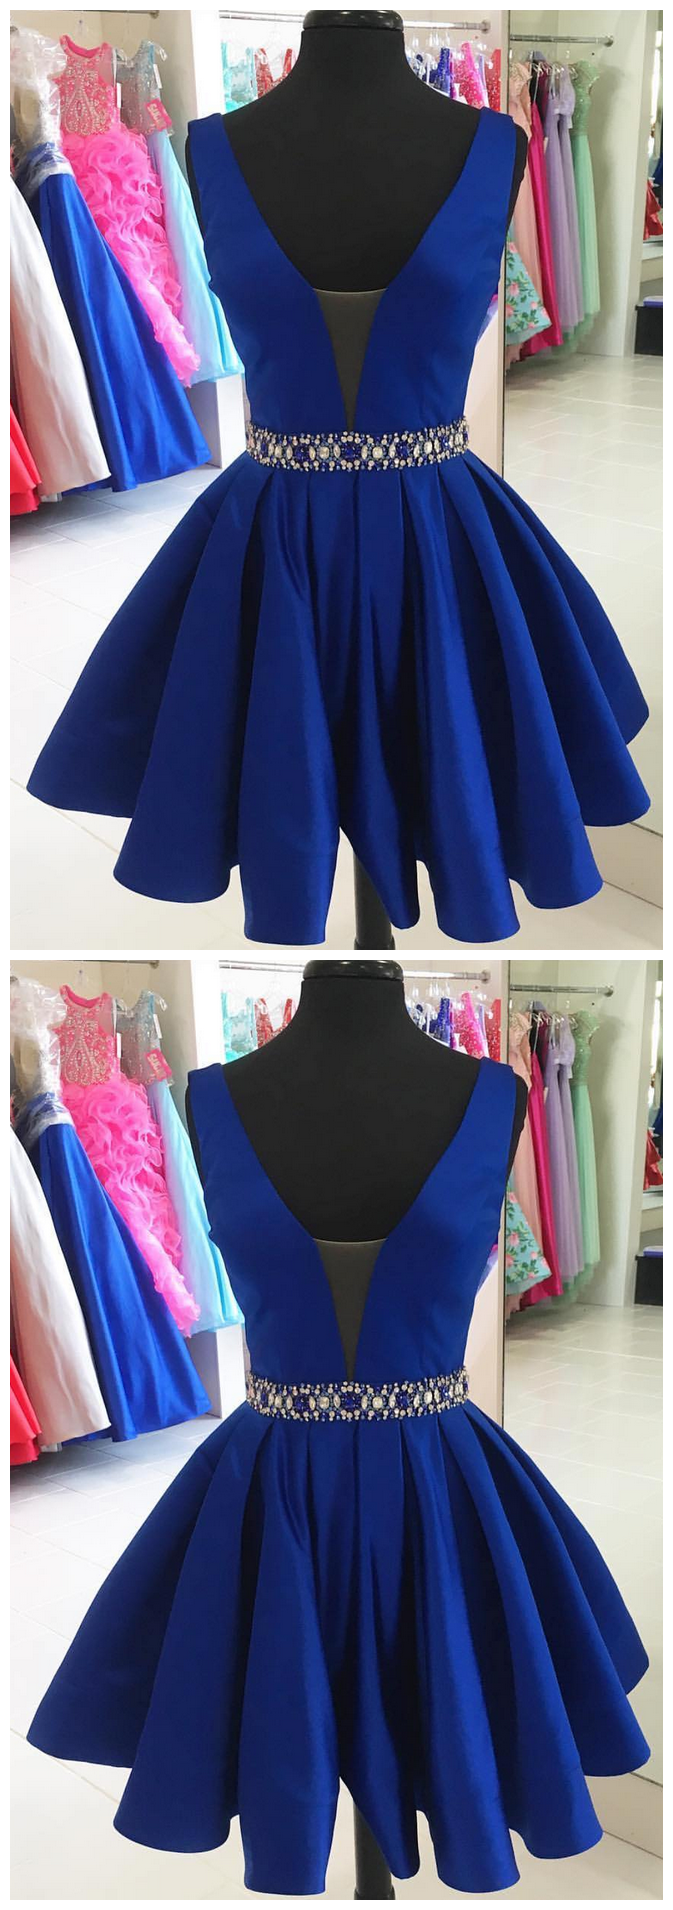 Short Royal Blue Homecoming Dress,charming Party Dresses, Sexy Cocktail Dresses